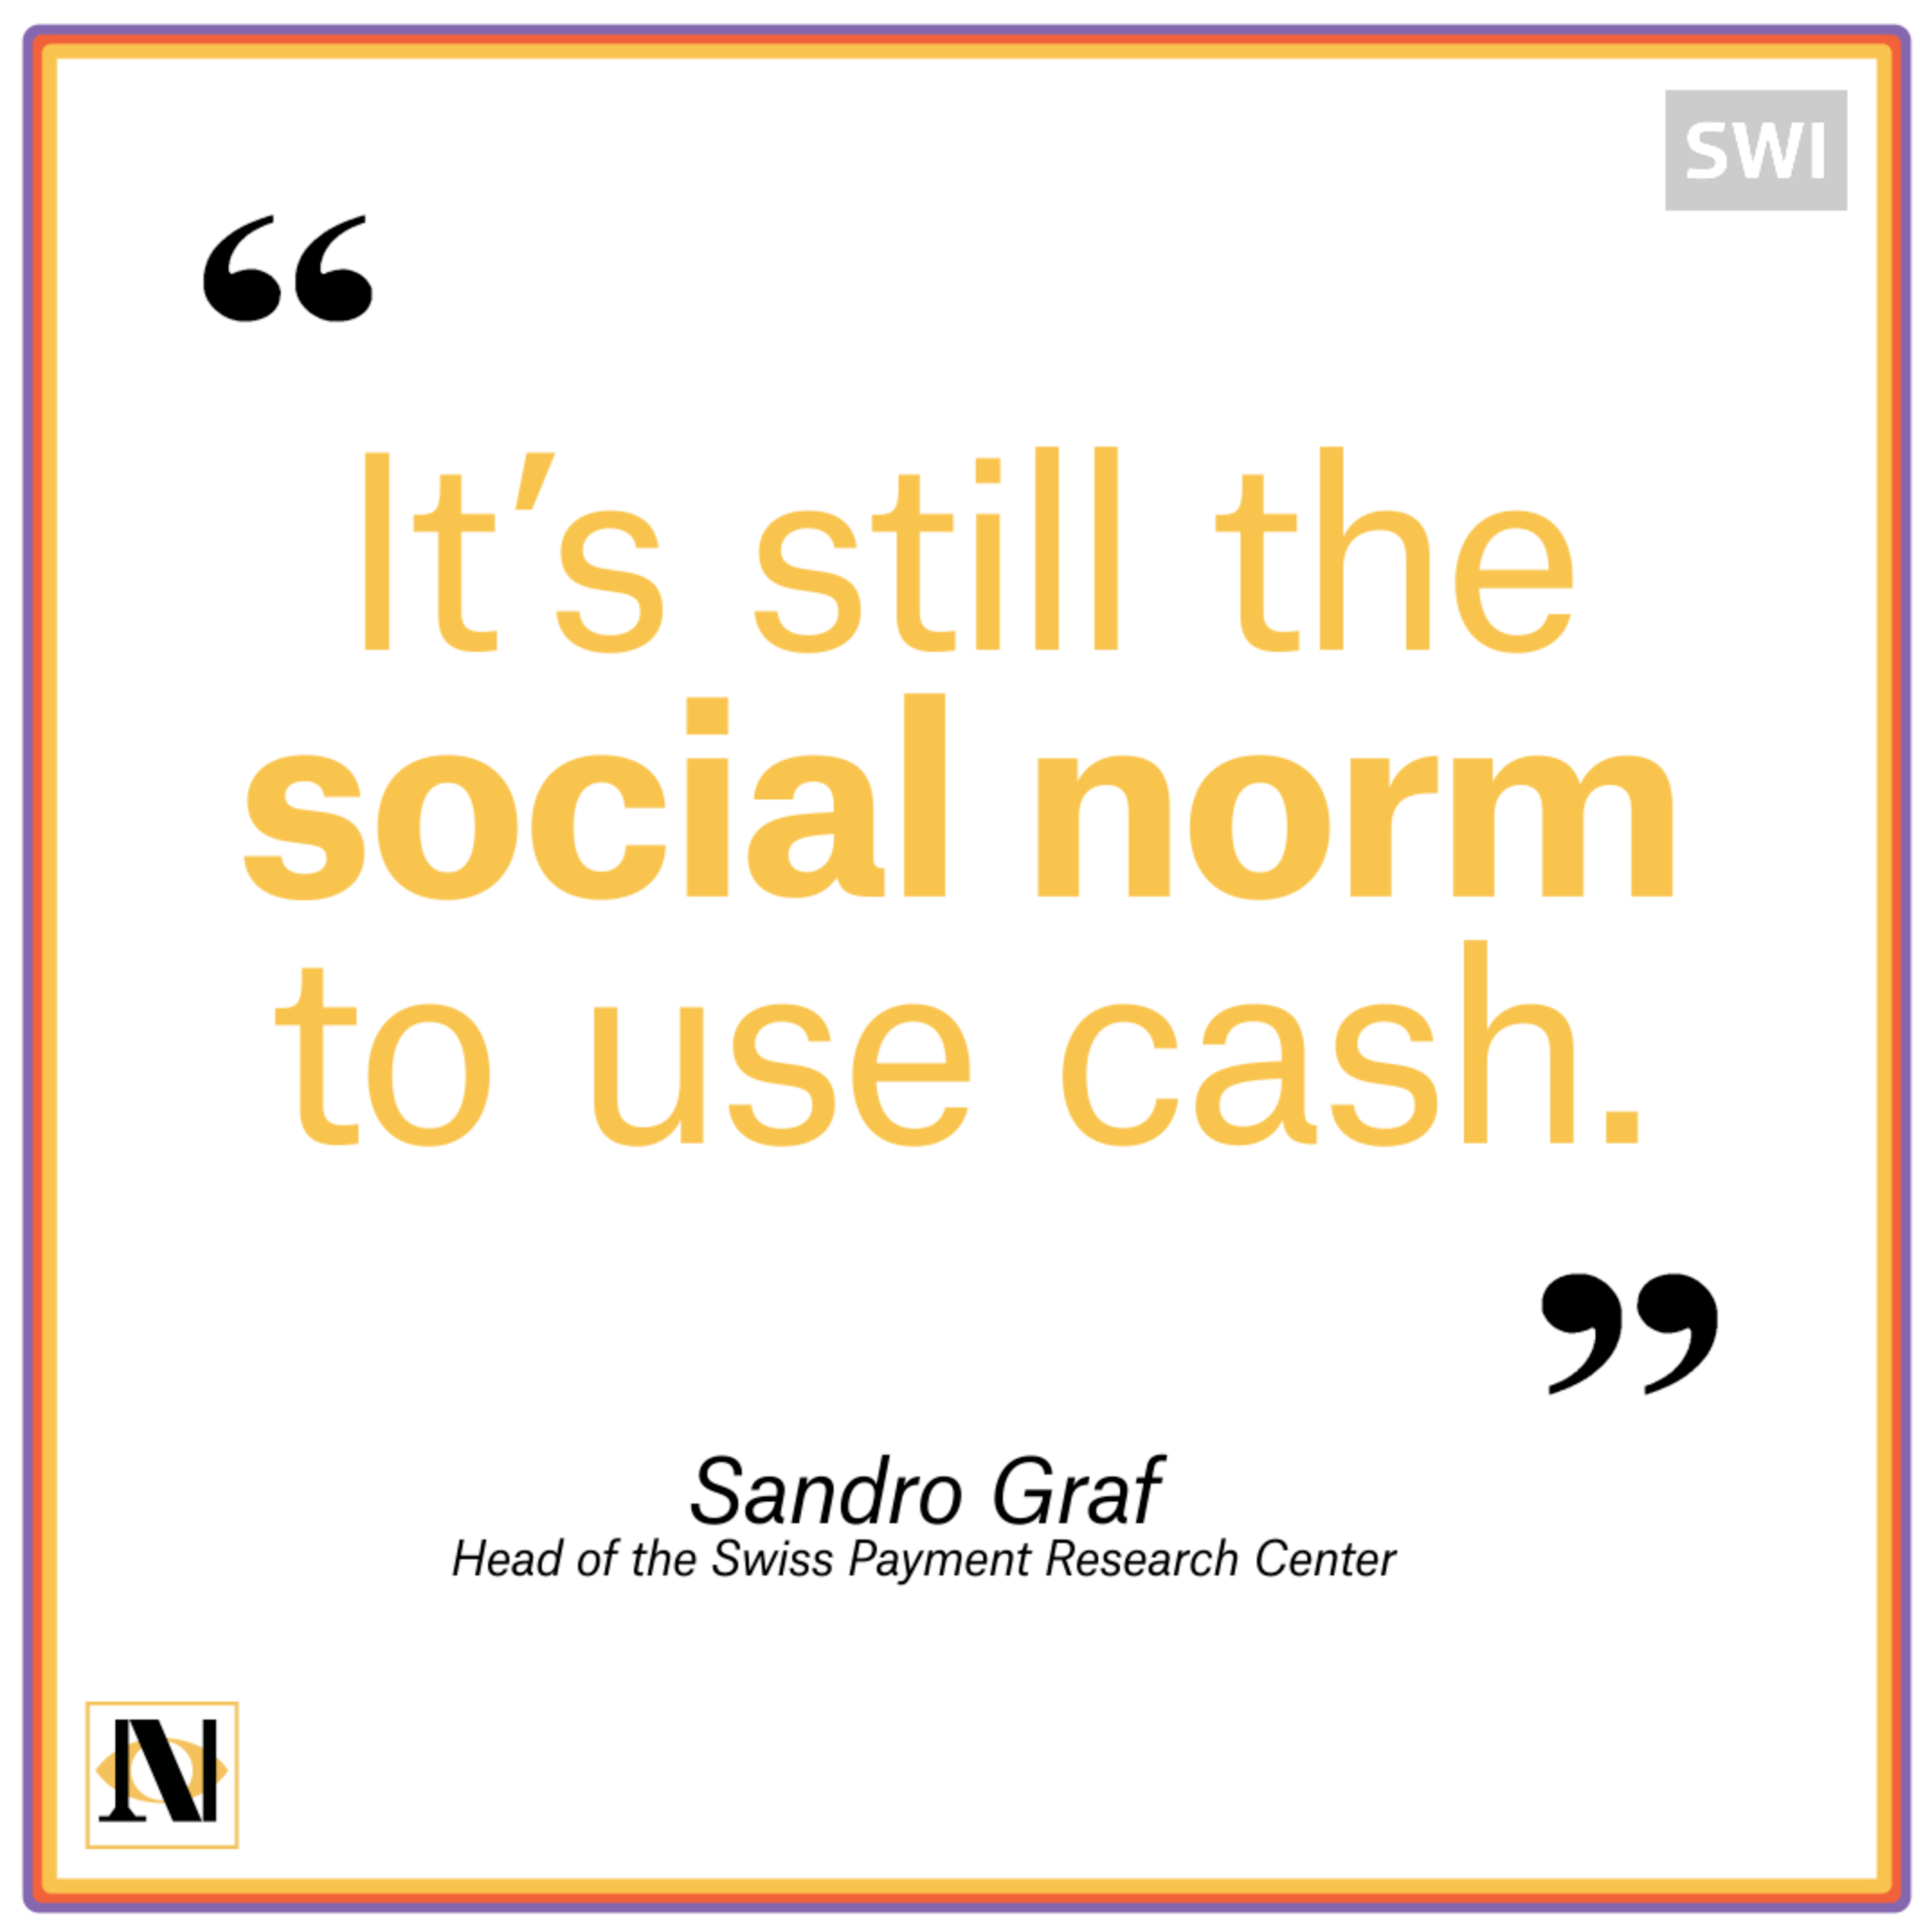 quote about paying cash rather than cashless